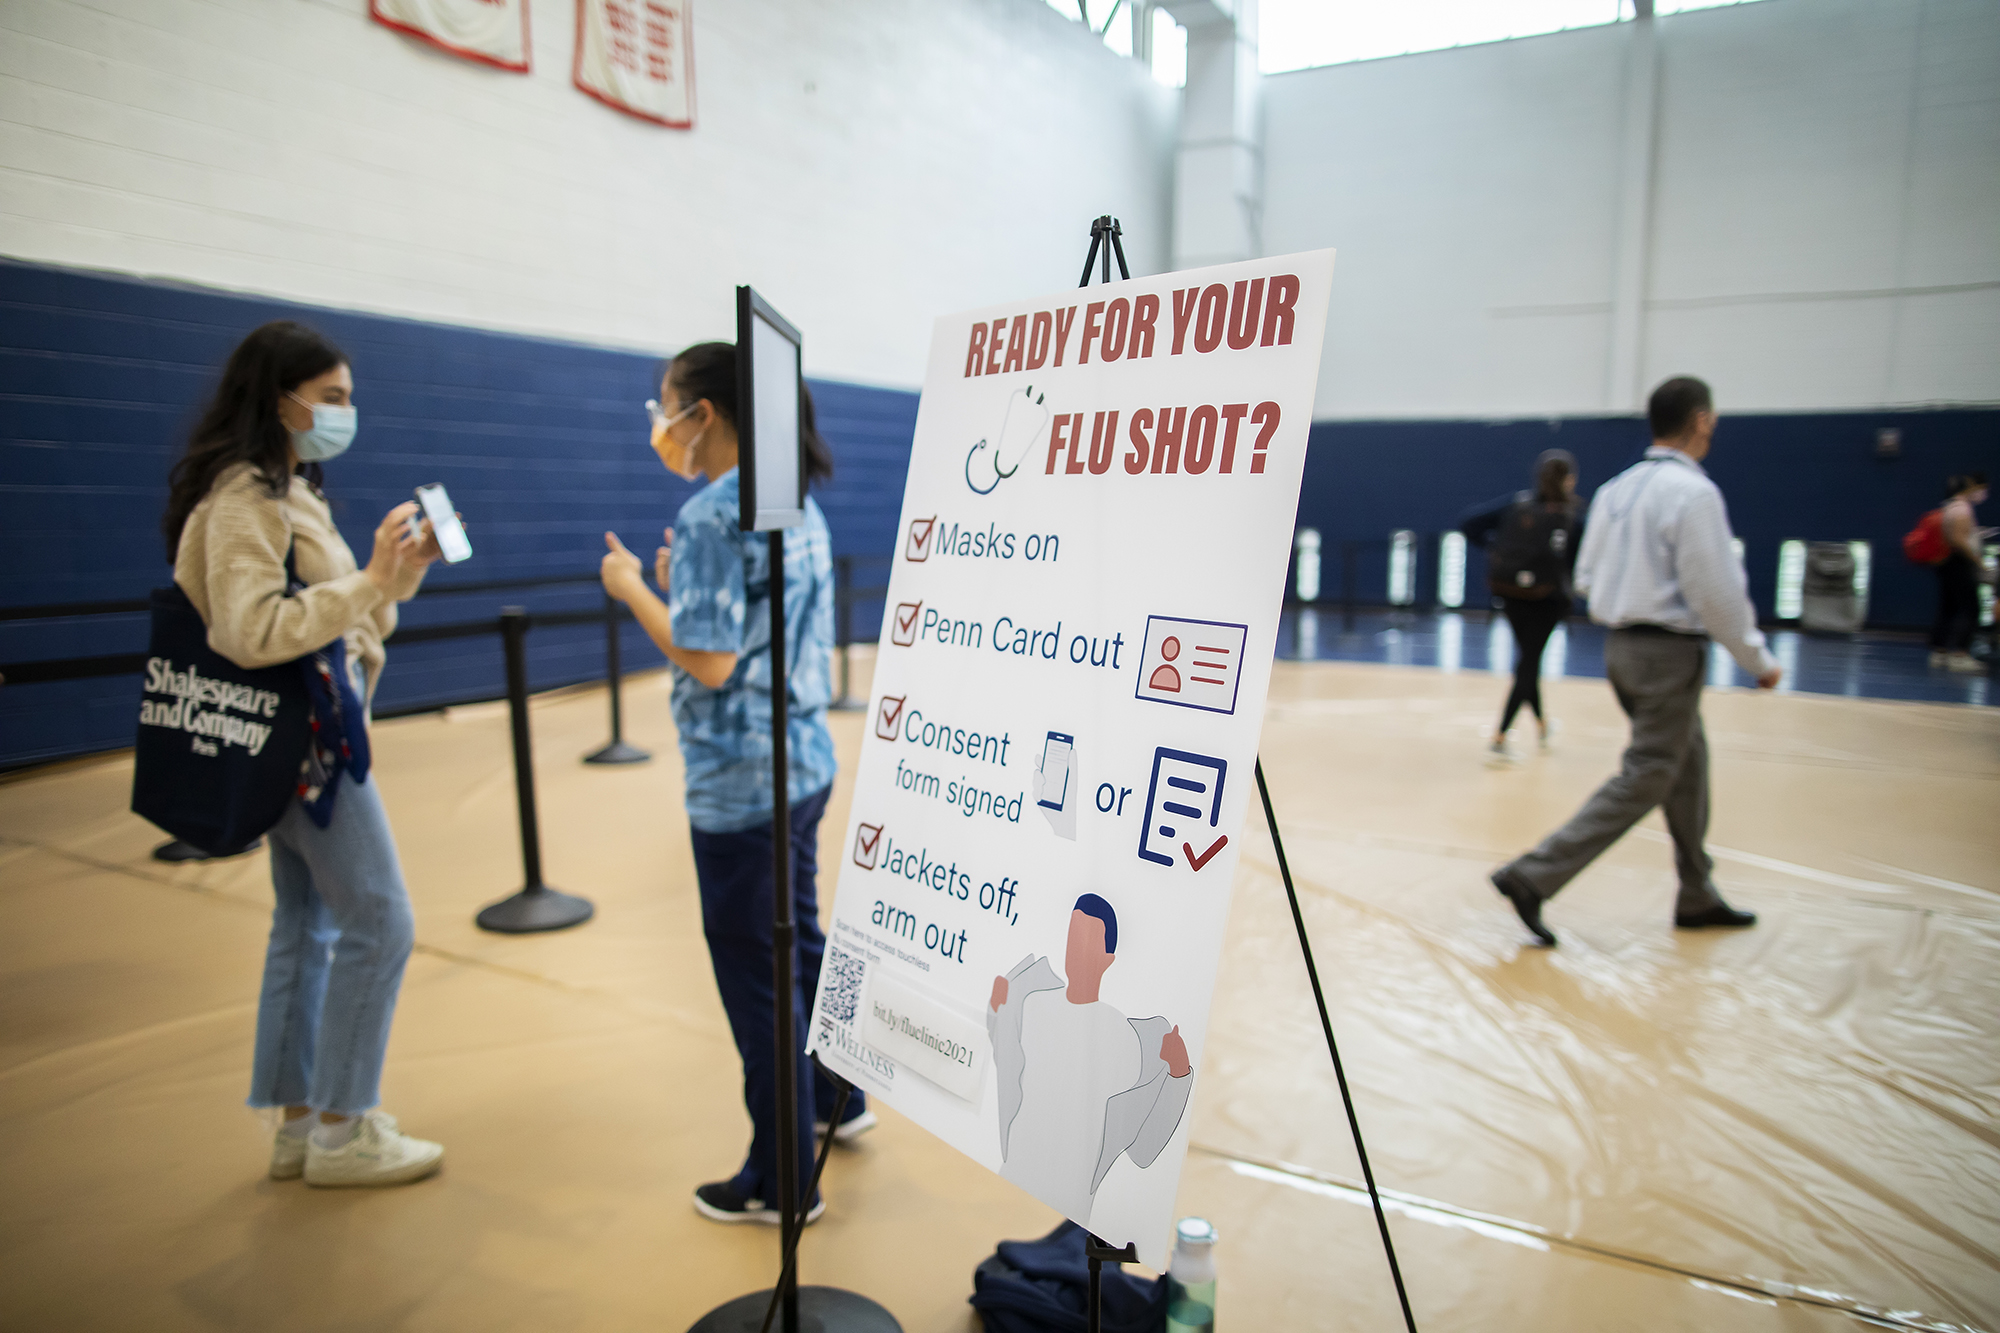 A patient checks in at a flu vaccine clinic next to a sign that says "Ready for your flu shot?"